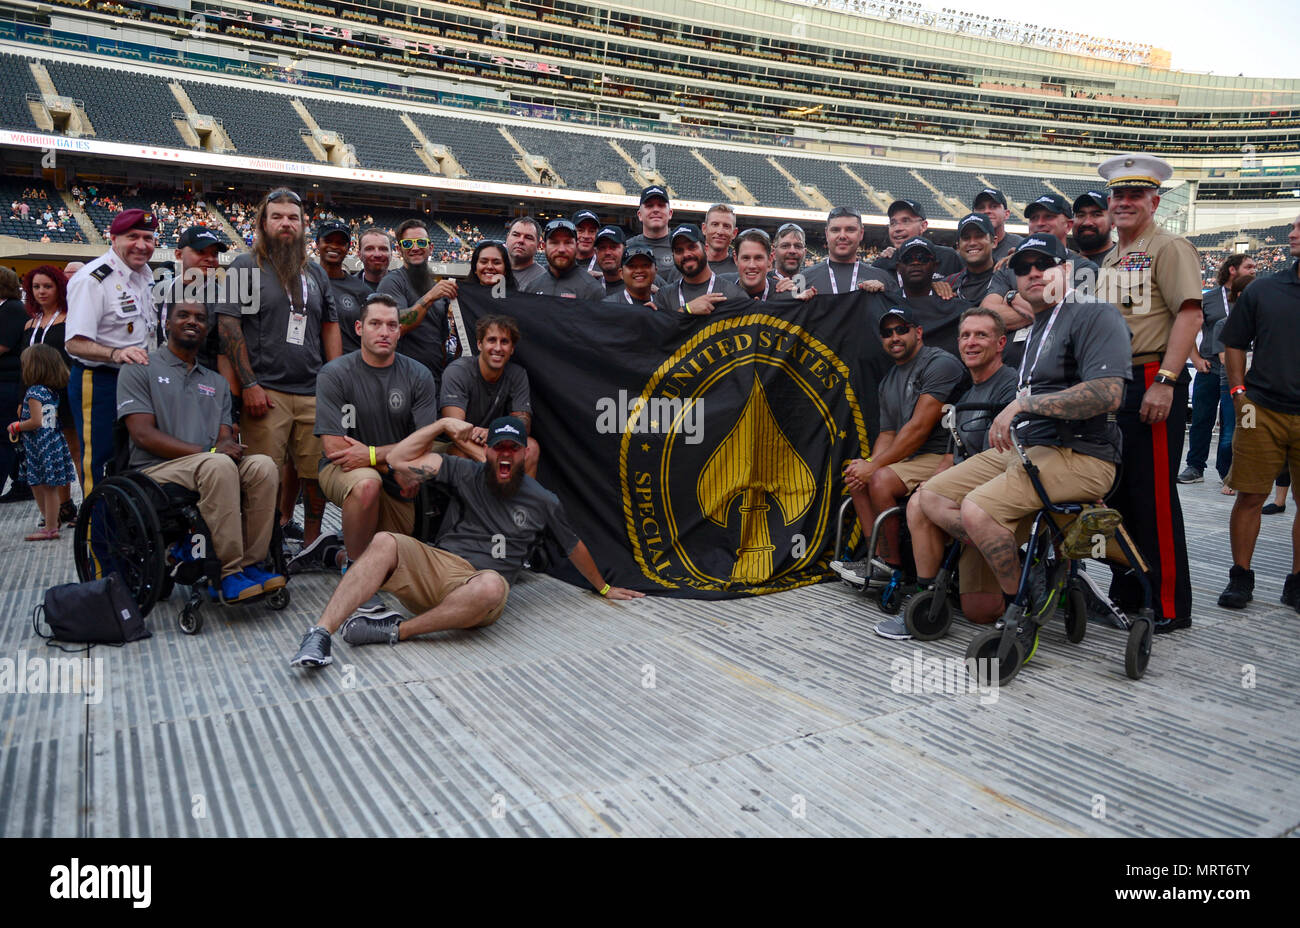 Team SOCOM pose for a picture with Lt. Gen. Joseph Osterman, (far right) deputy commander USSOCOM, at the opening ceremony for the 2017 Warrior Games on Soldier Field in Chicago, Ill., July 1, 2017. The Warrior Games were established in 2010 as a way to enhance the recovery and rehabilitation of wounded warriors and to expose them to adaptive sports. Photo by Michael Bottoms, USSOCOM Office of Communication. Stock Photo